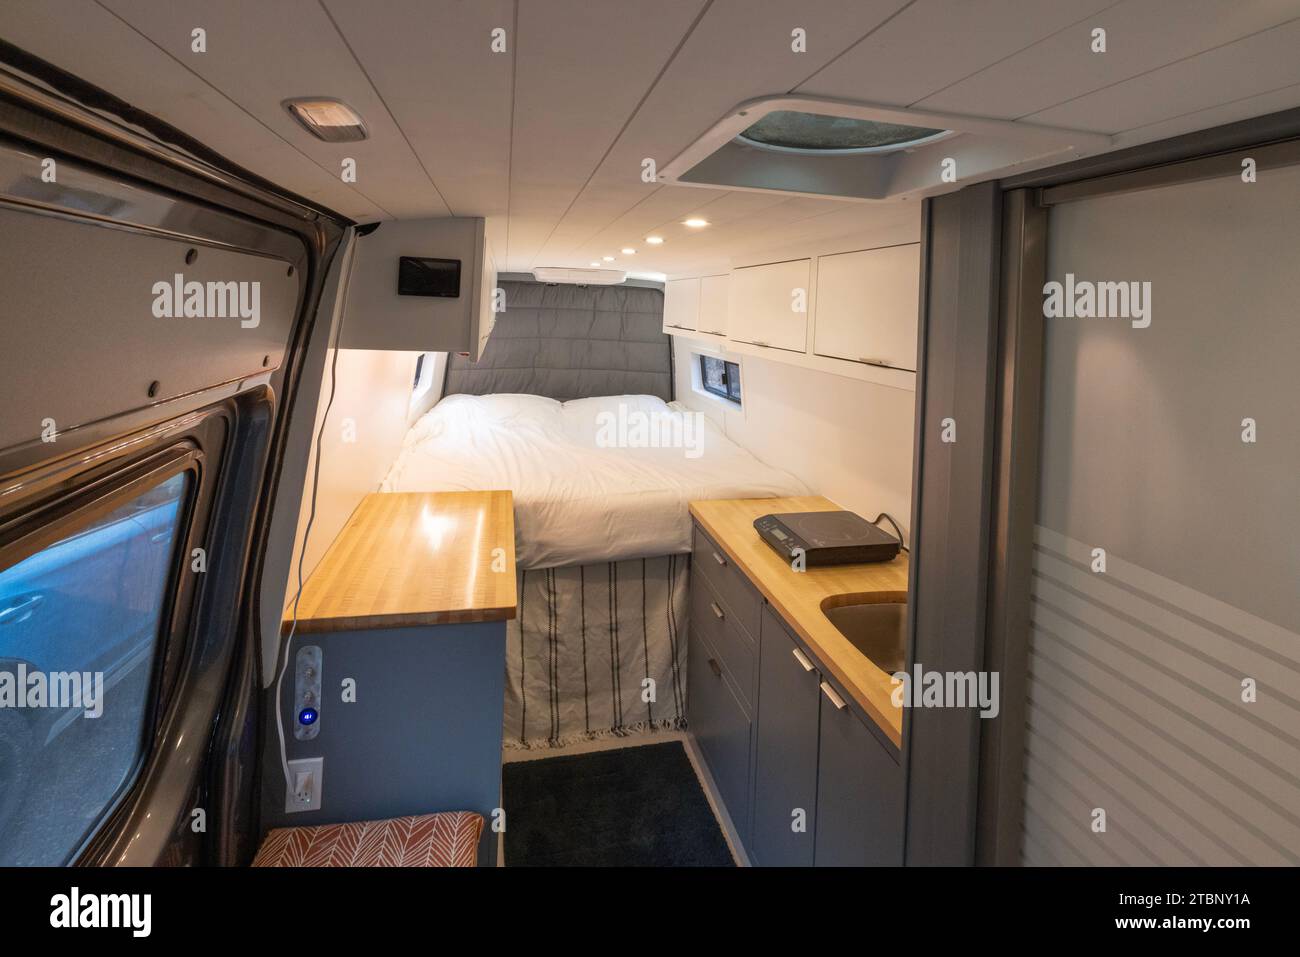 Warm inviting interior of a converted camper van Stock Photo